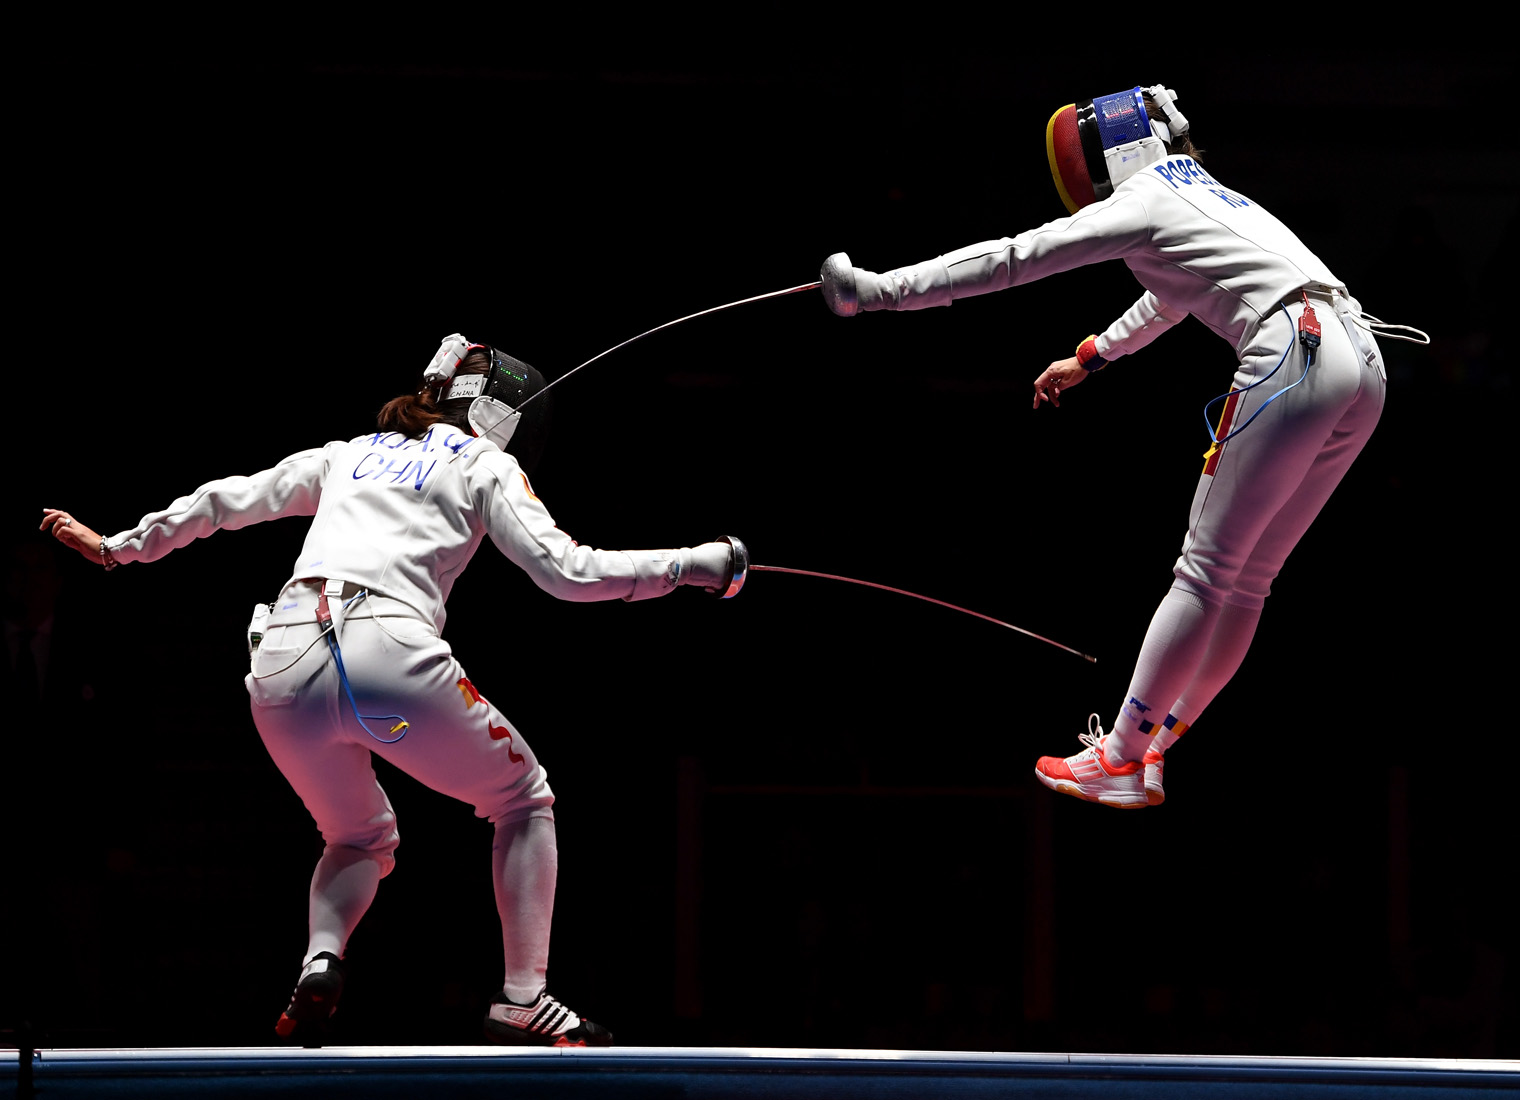 RIO DE JANEIRO, BRAZIL - AUGUST 11: Ana Maria Popescu of Romania competes against Anqi Xu of China during the Women's Epee Team Gold Medal Match bout on Day 6 of the 2016 Rio Olympics at Carioca Arena 3 on August 11, 2016 in Rio de Janeiro, Brazil. (Photo by Laurence Griffiths/Getty Images)